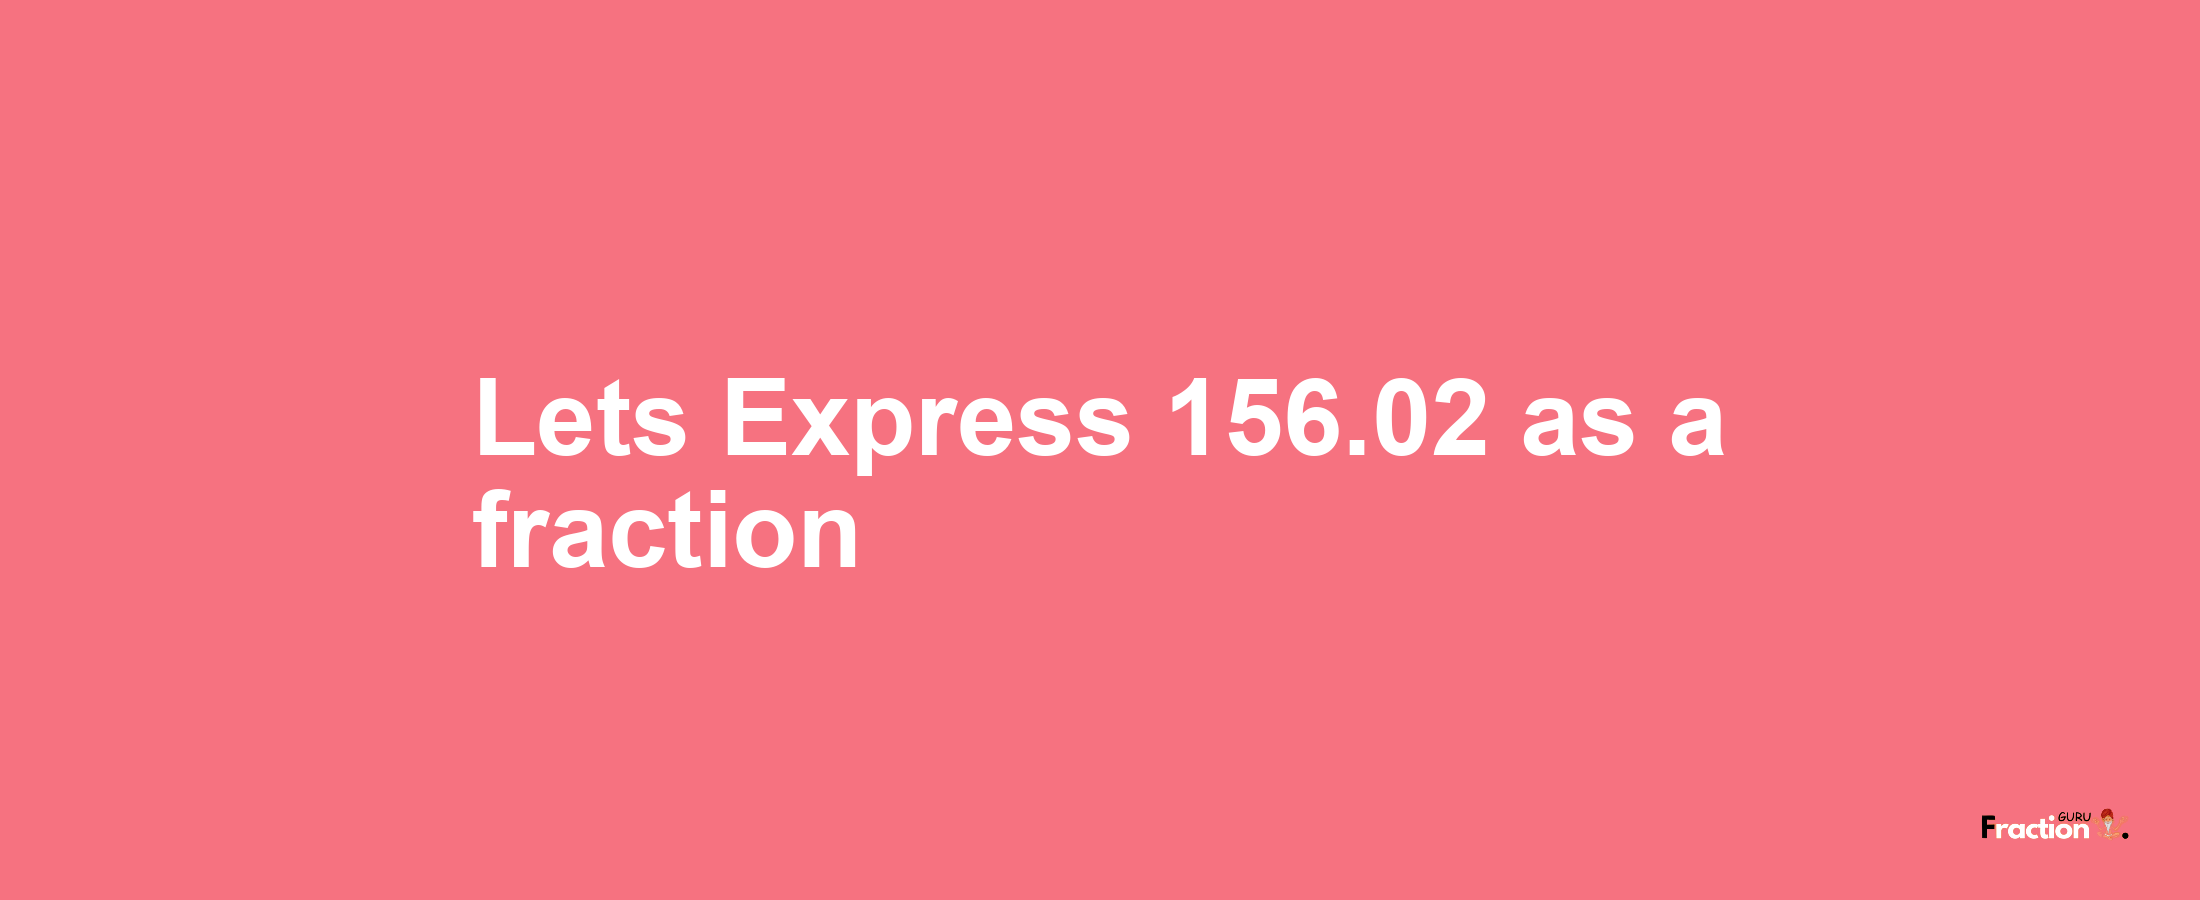 Lets Express 156.02 as afraction